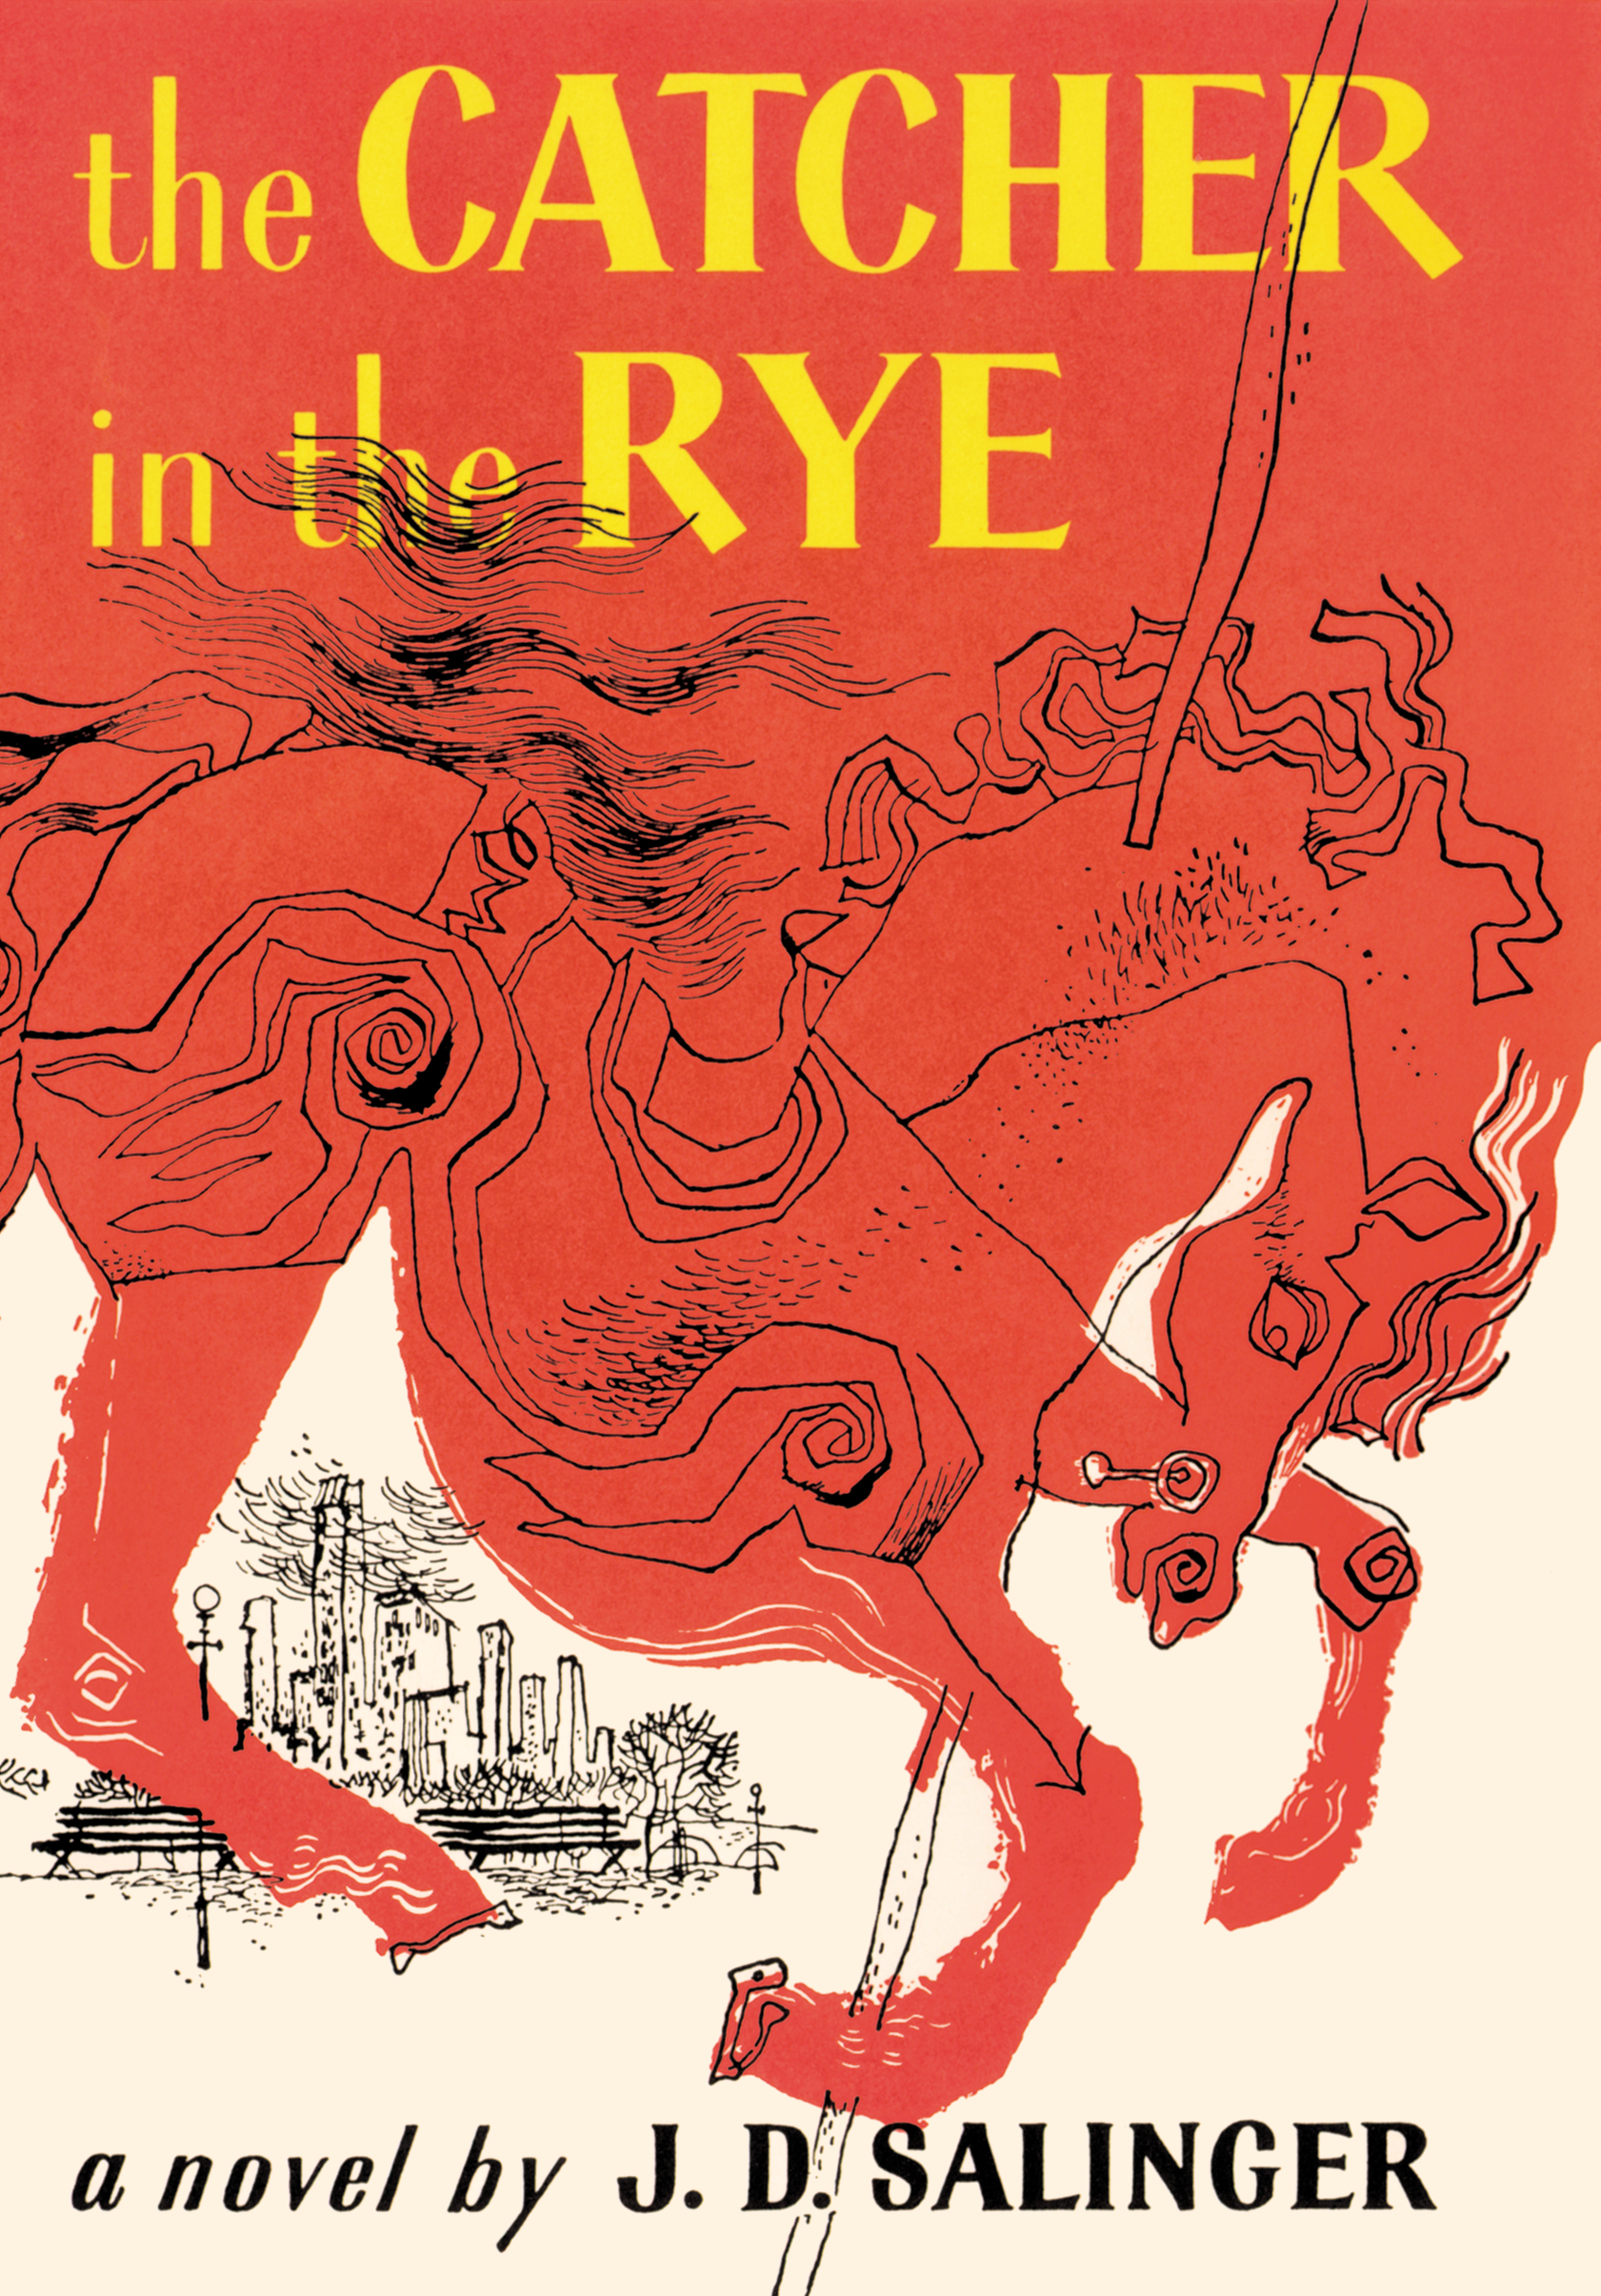 catcher-in-the-rye-book-cover